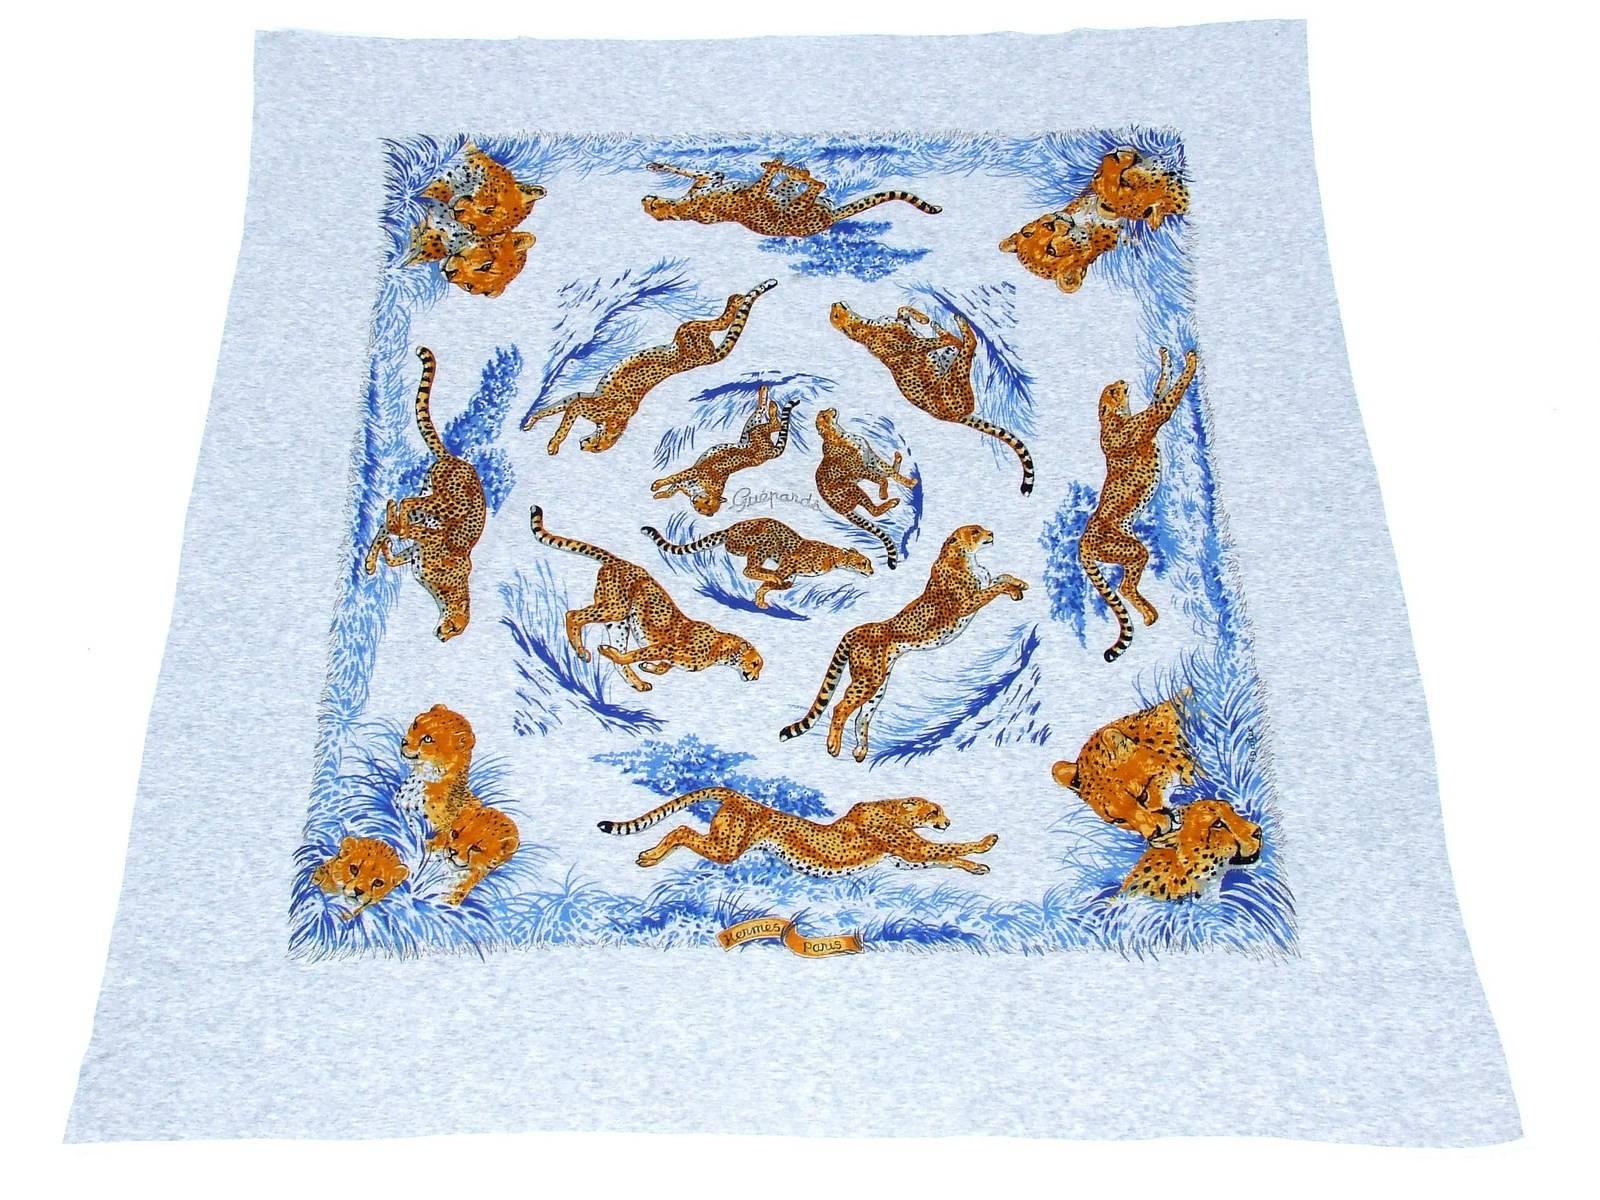 GORGEOUS AUTHENTIC HERMES SCARF

Pattern: 